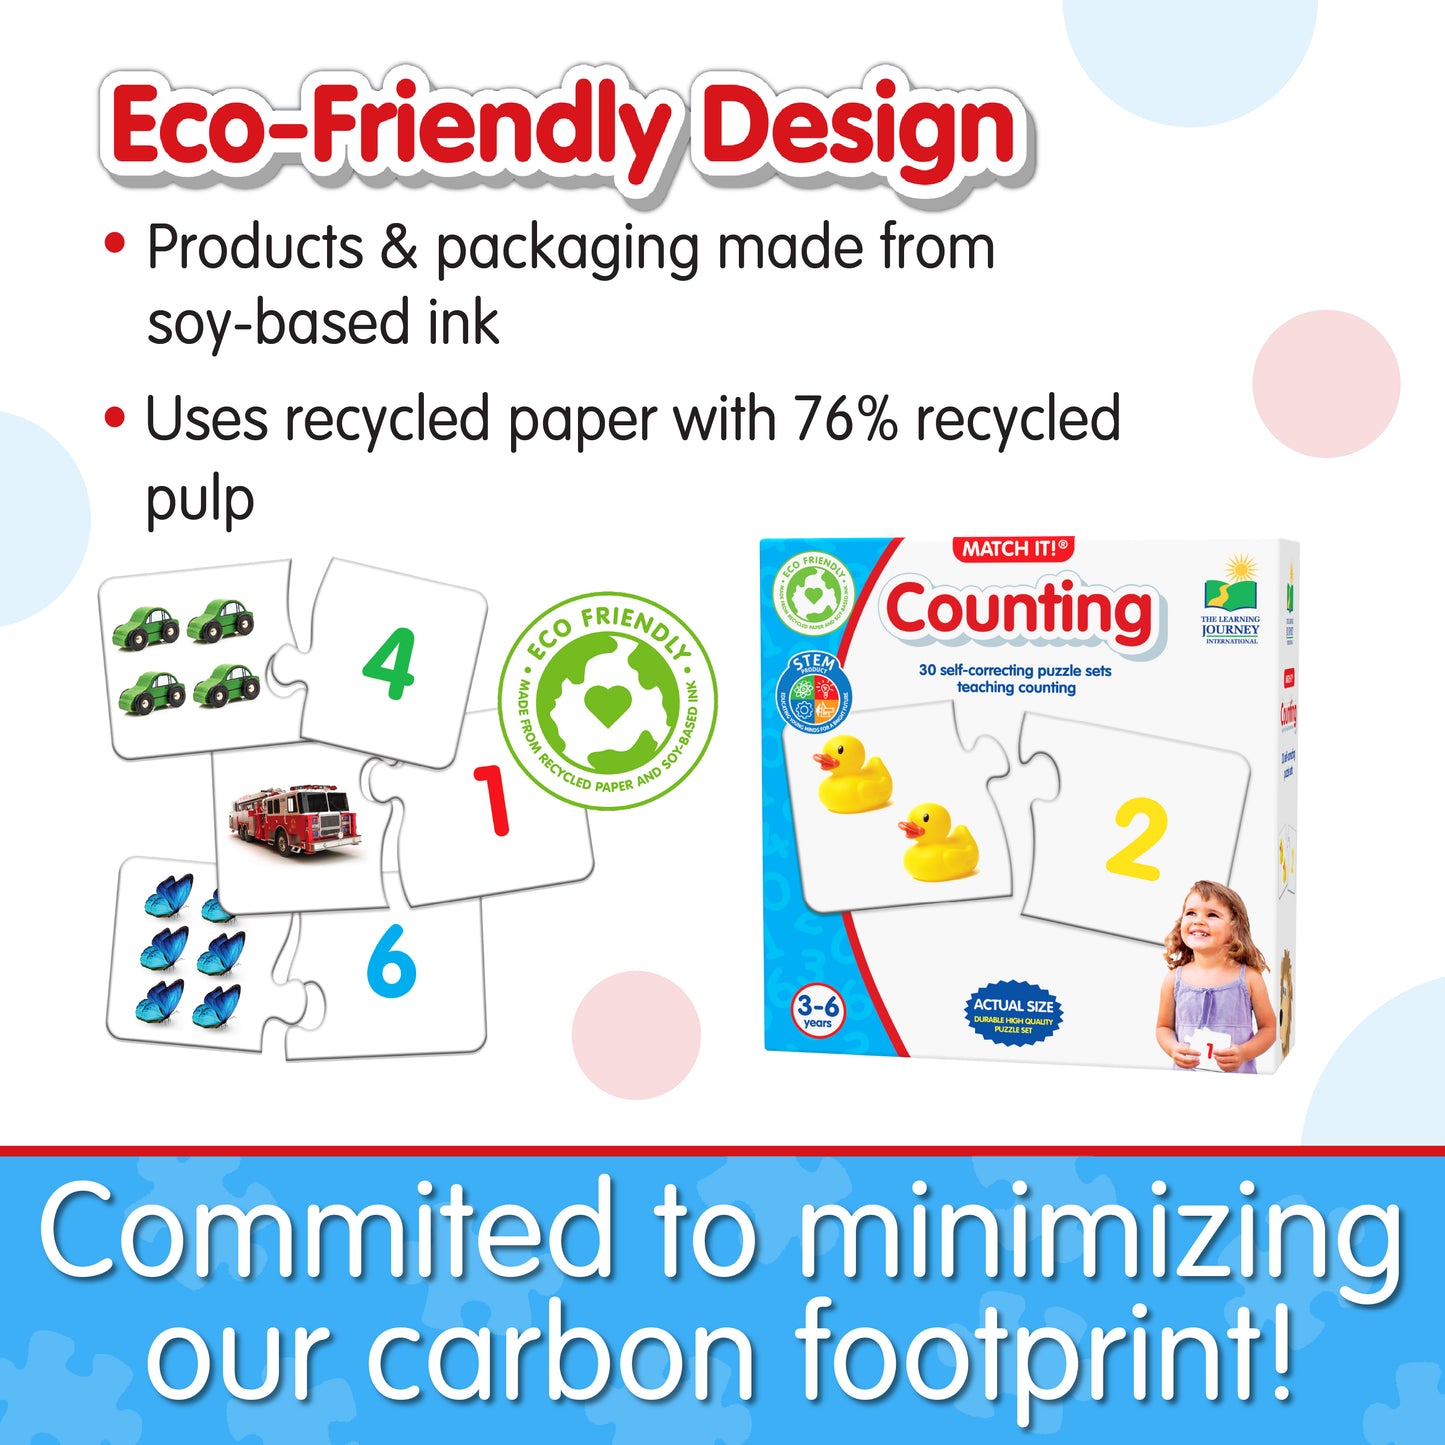 Infographic about Match It - Counting's eco-friendly design that says, "Committed to minimizing our carbon footprint!"